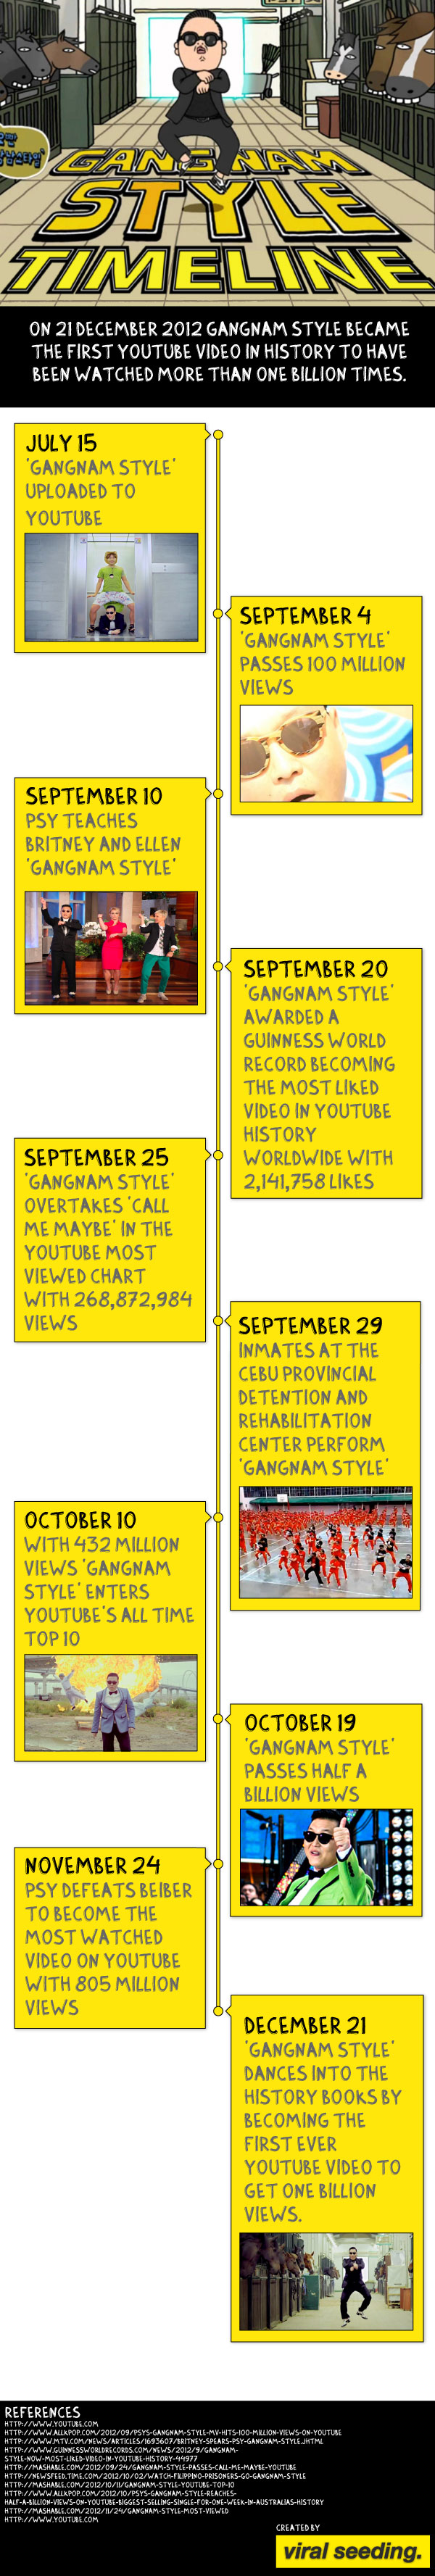 gangnam-style-timeline-infographic